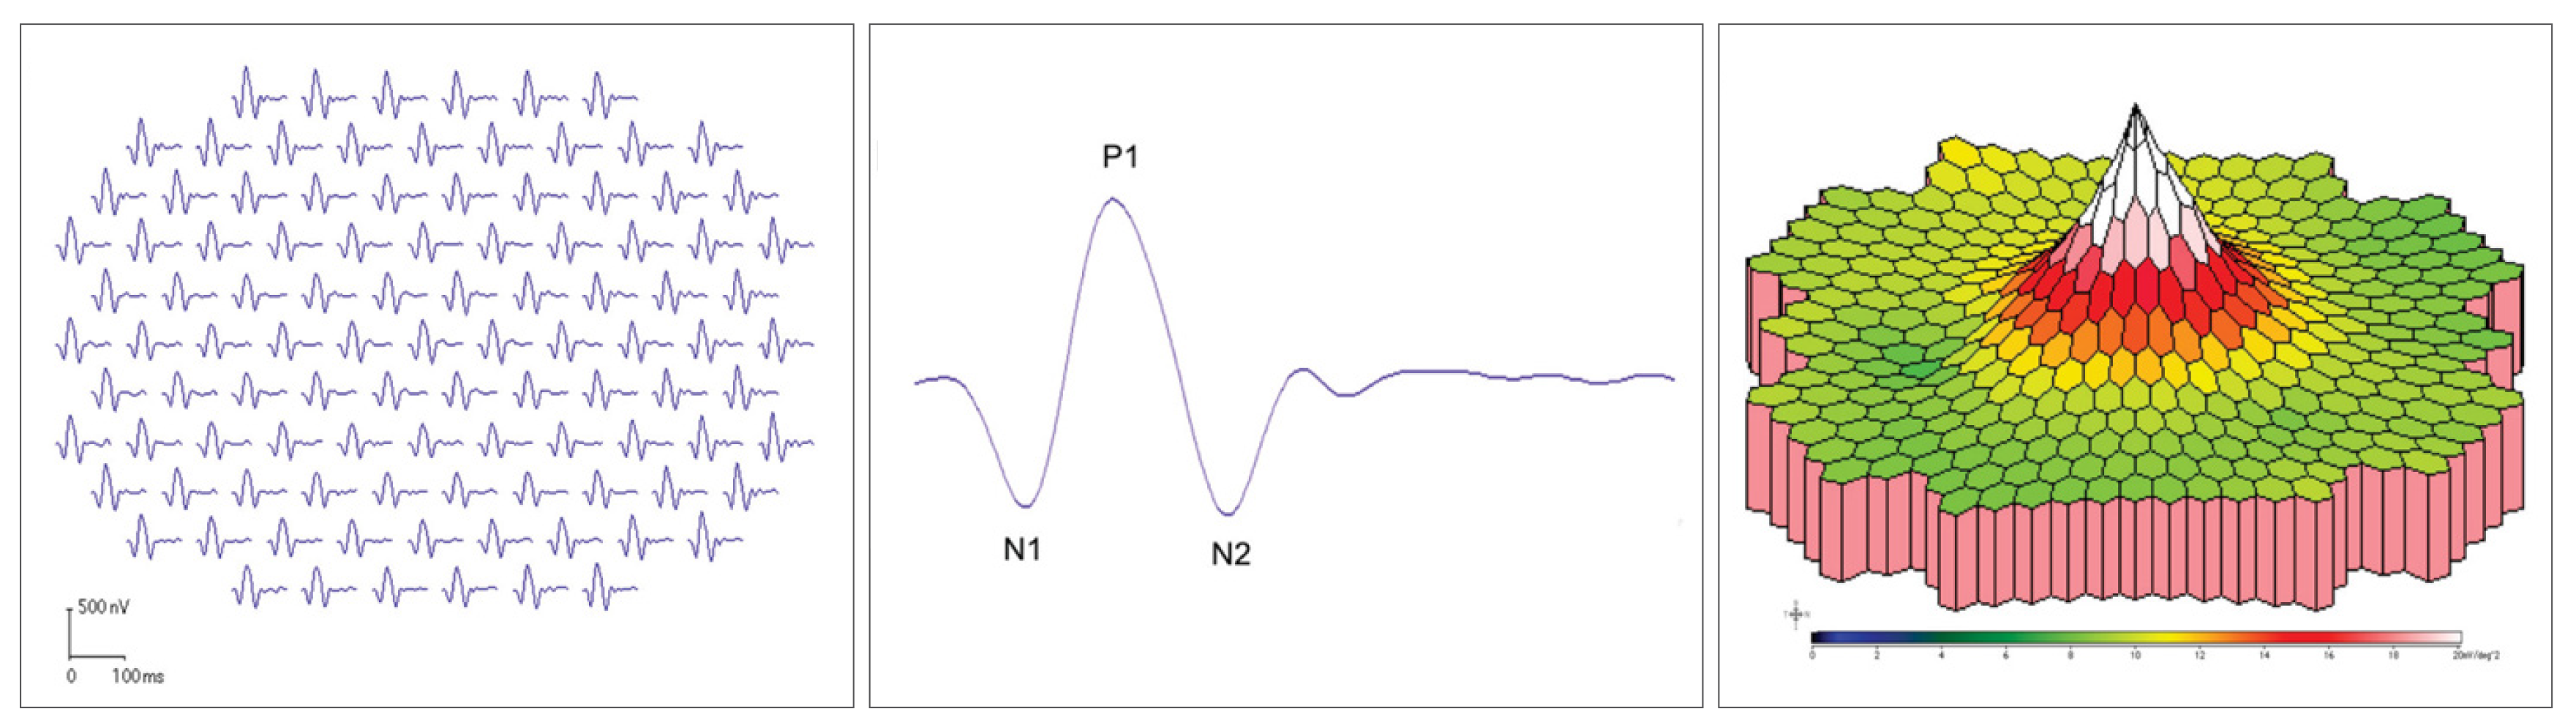 mfERG results are presented as a series of waveforms indicating electrical activity in the retina at each stimulus point (left image) as well as a topographic map of the results (right image). A typical wave is shown in the middle figure. 